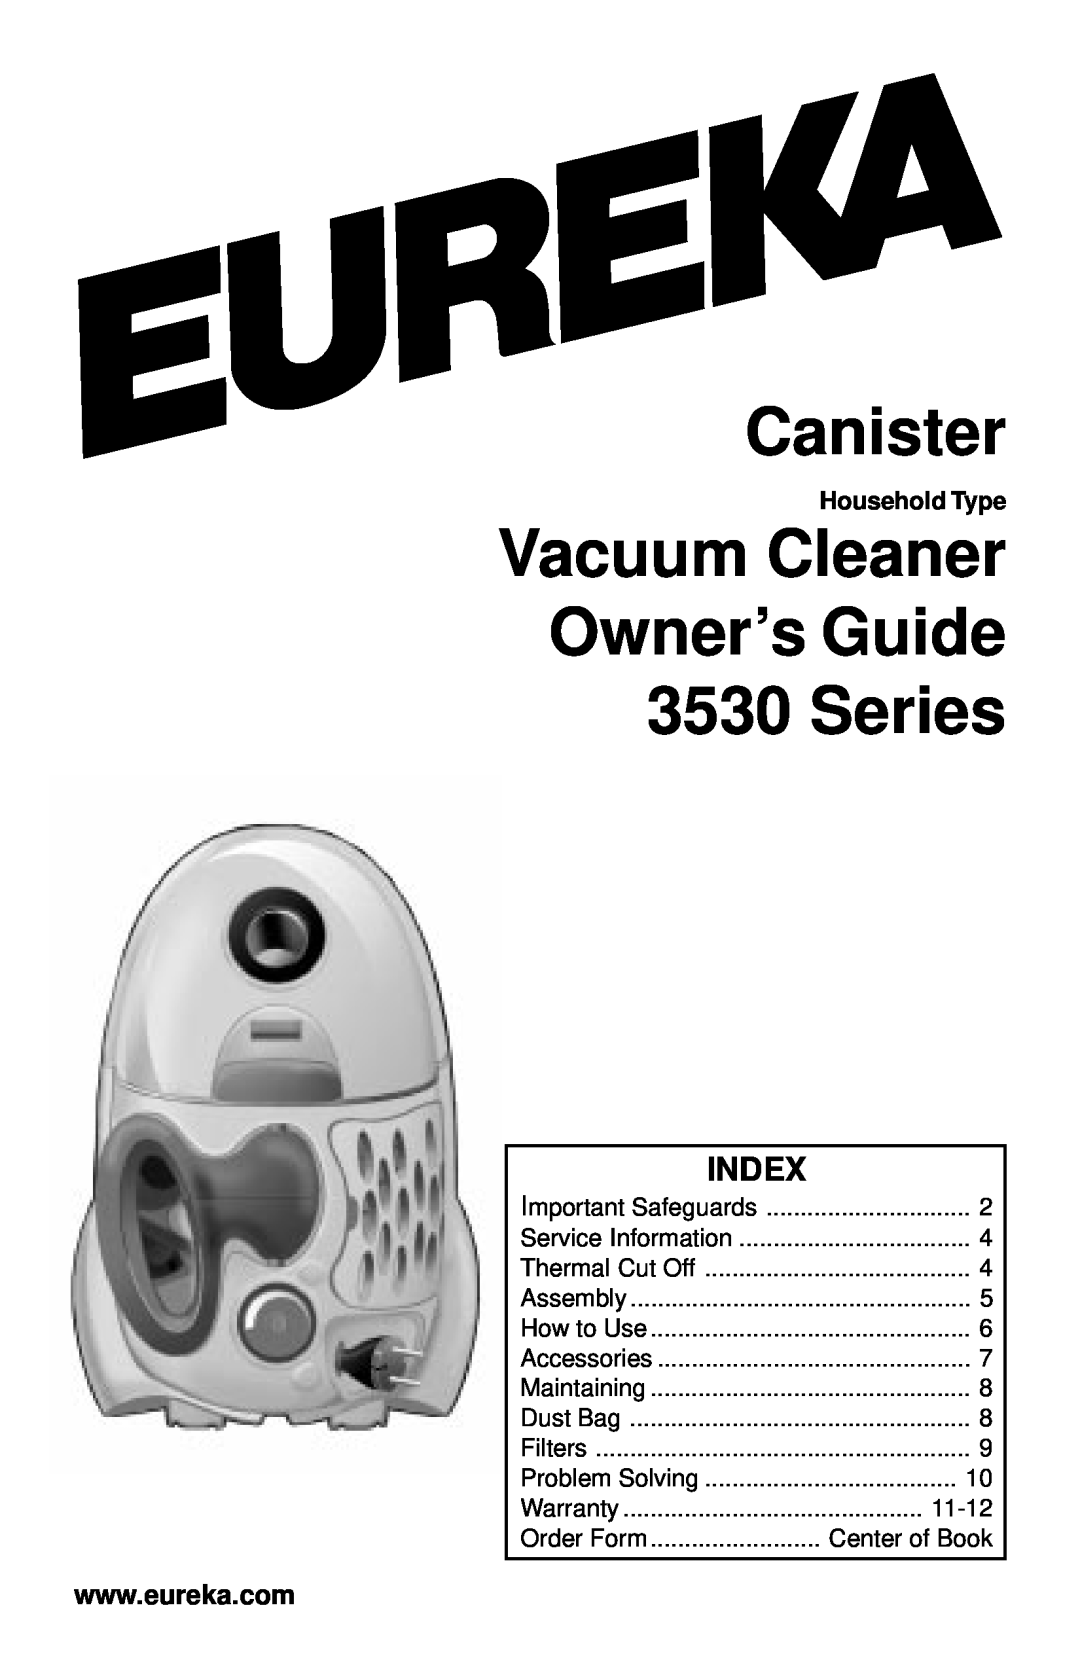 Eureka warranty Index, Canister, Vacuum Cleaner Owner’s Guide 3530 Series 